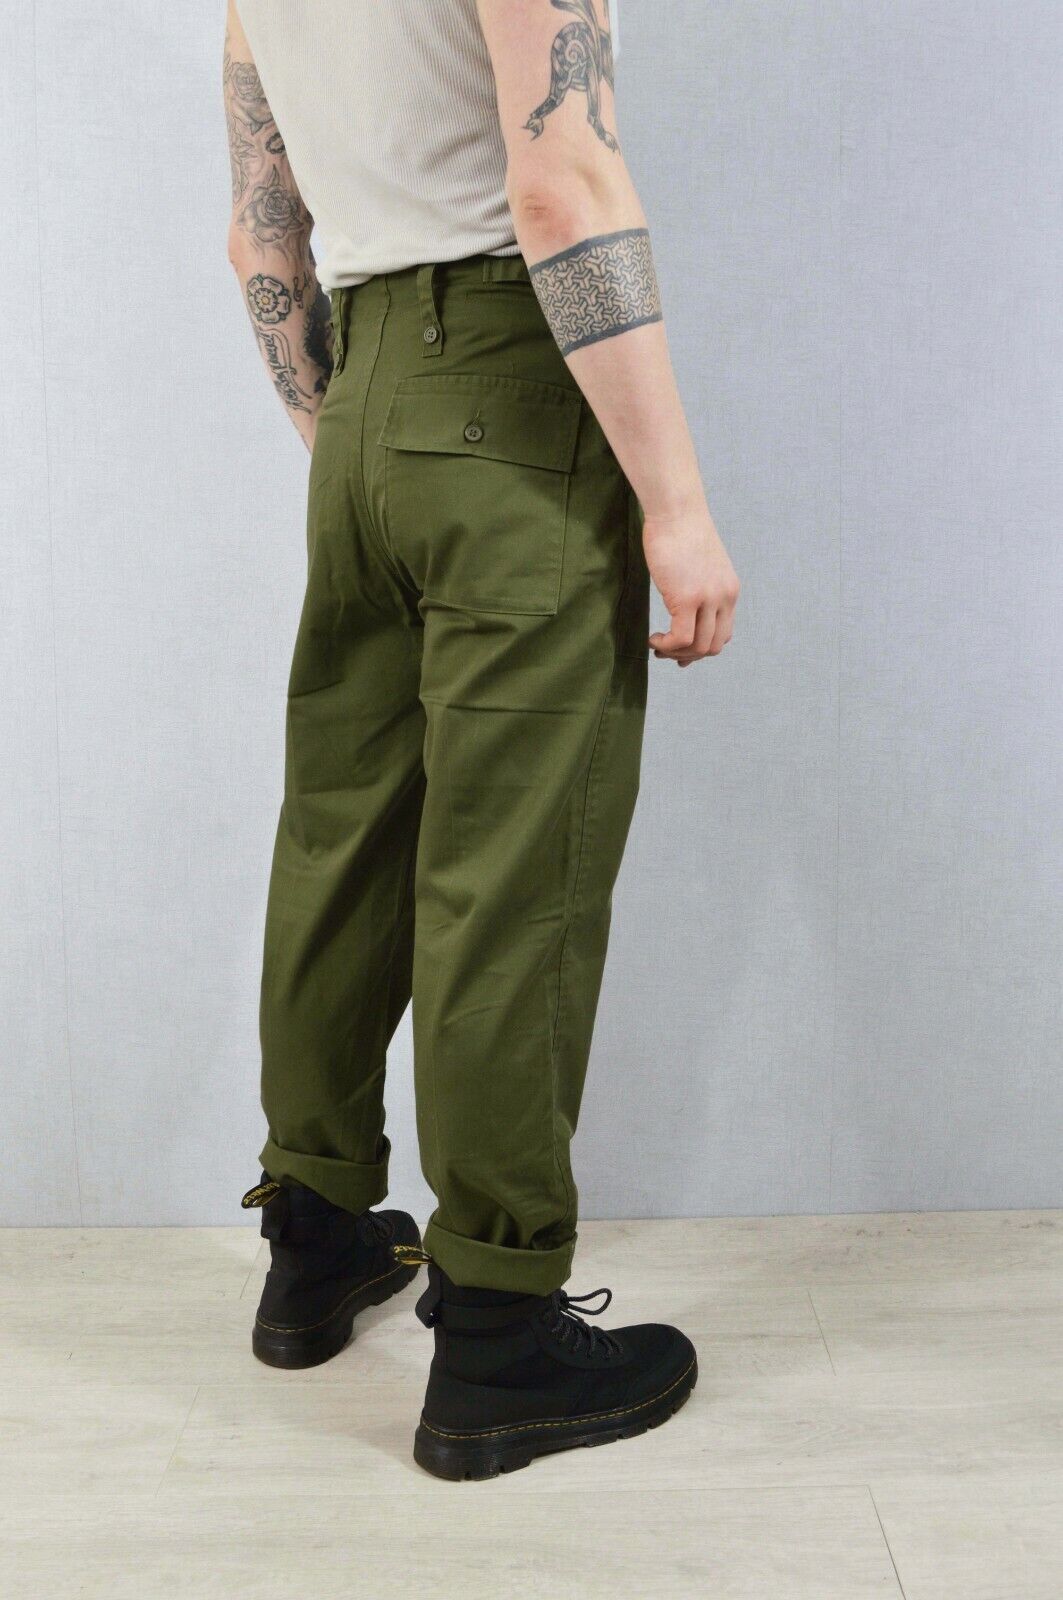 Vintage Army Pants - Utility Workwear Trousers Green 80s 90s -26 